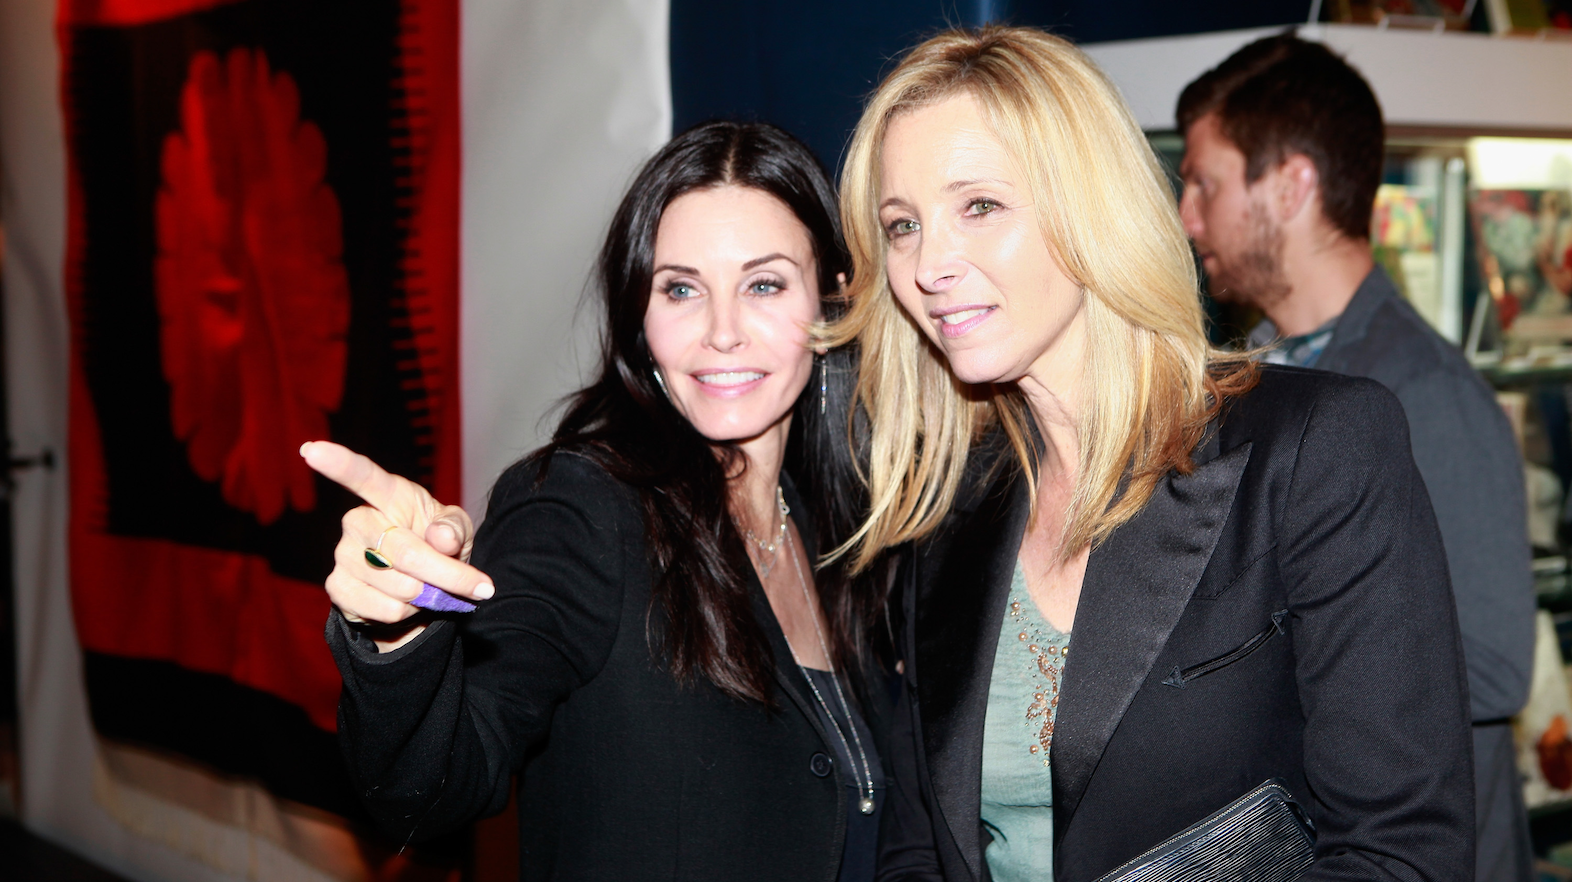 Courteney Cox and Lisa Kudrow